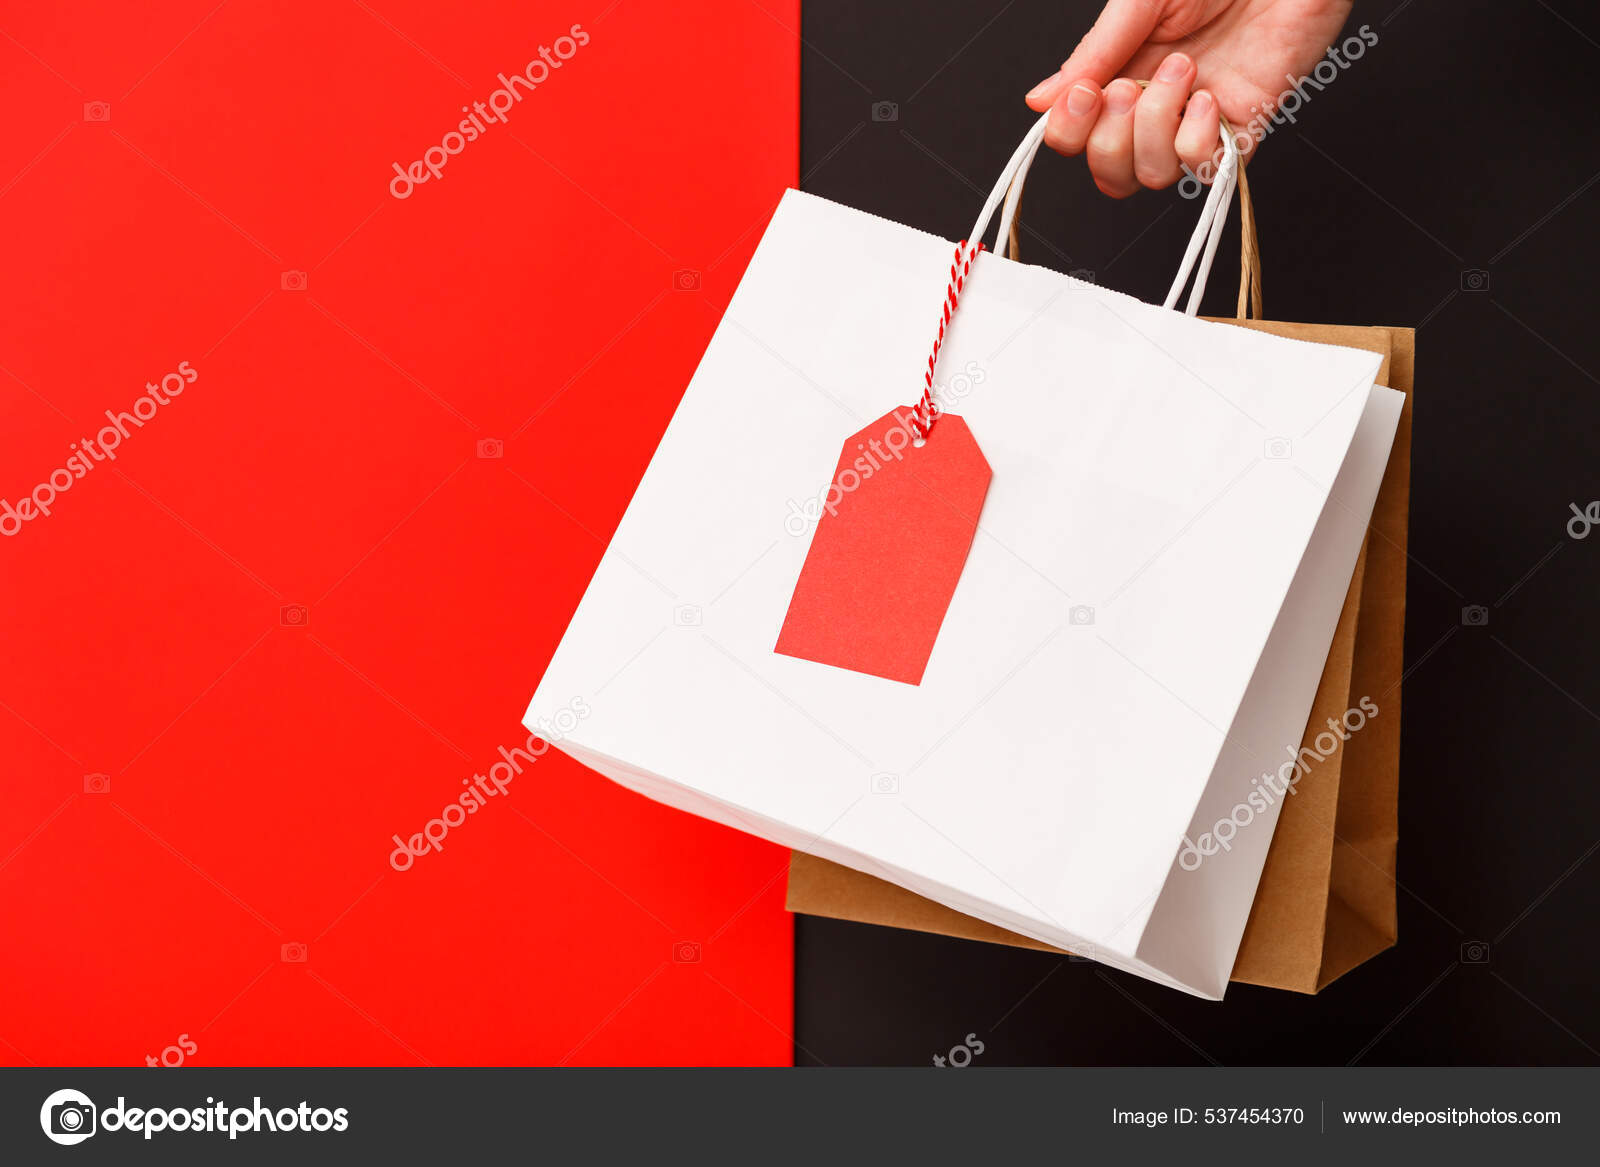 Shopping Craft Bags In Colors Stock Illustration - Download Image